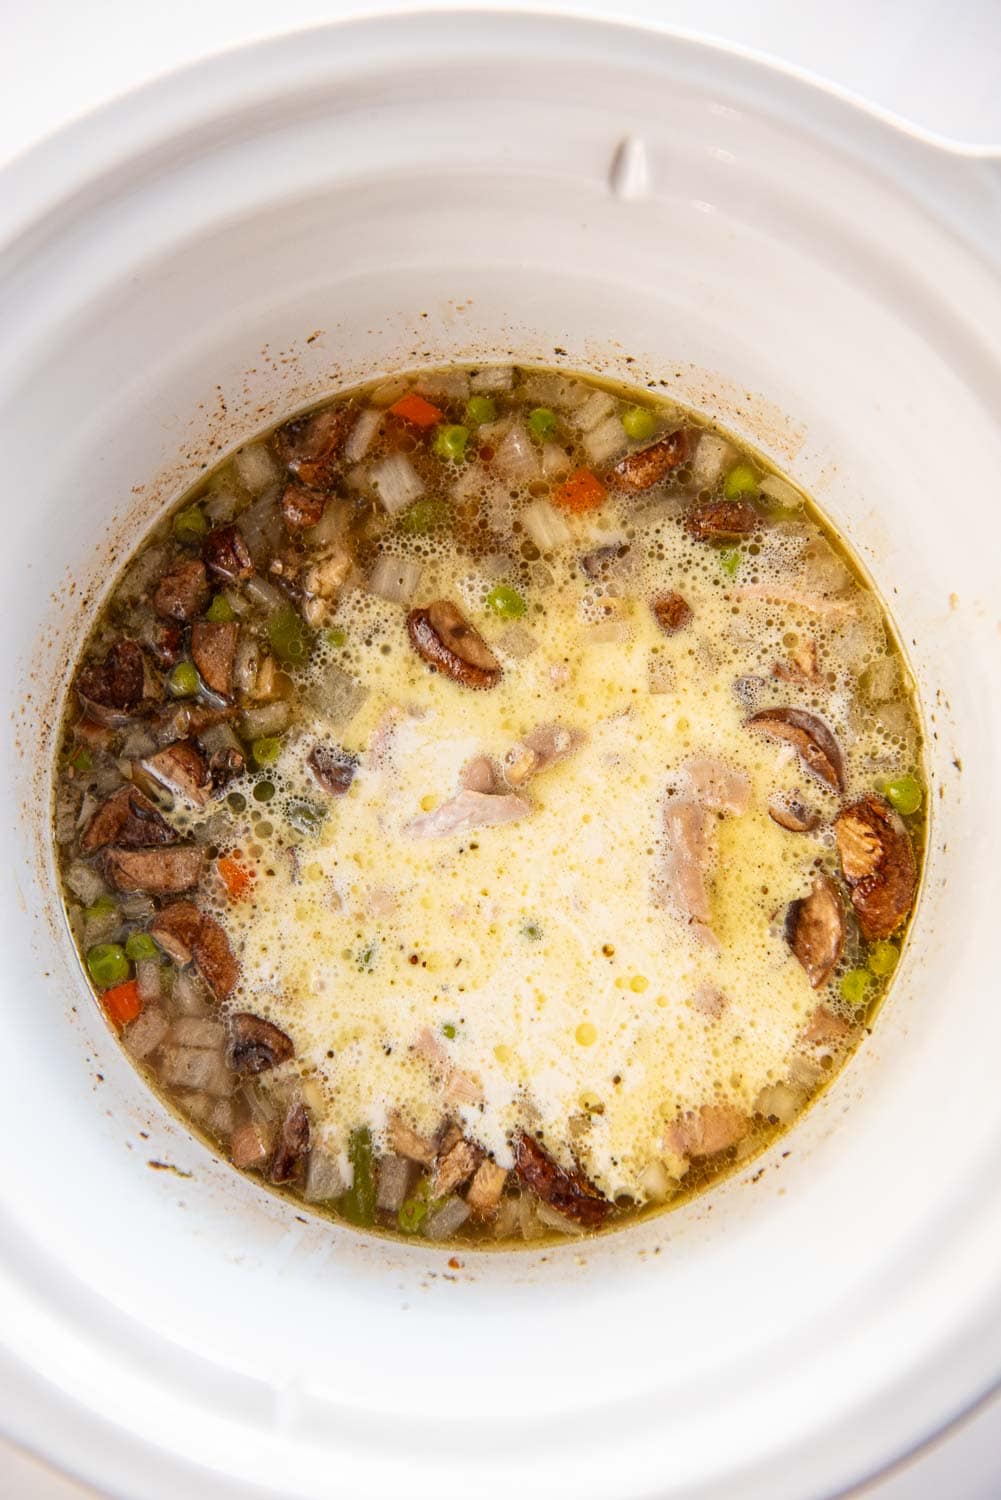 Mix of chicken, vegetables, broth, and flour mixture in slow cooker cooking